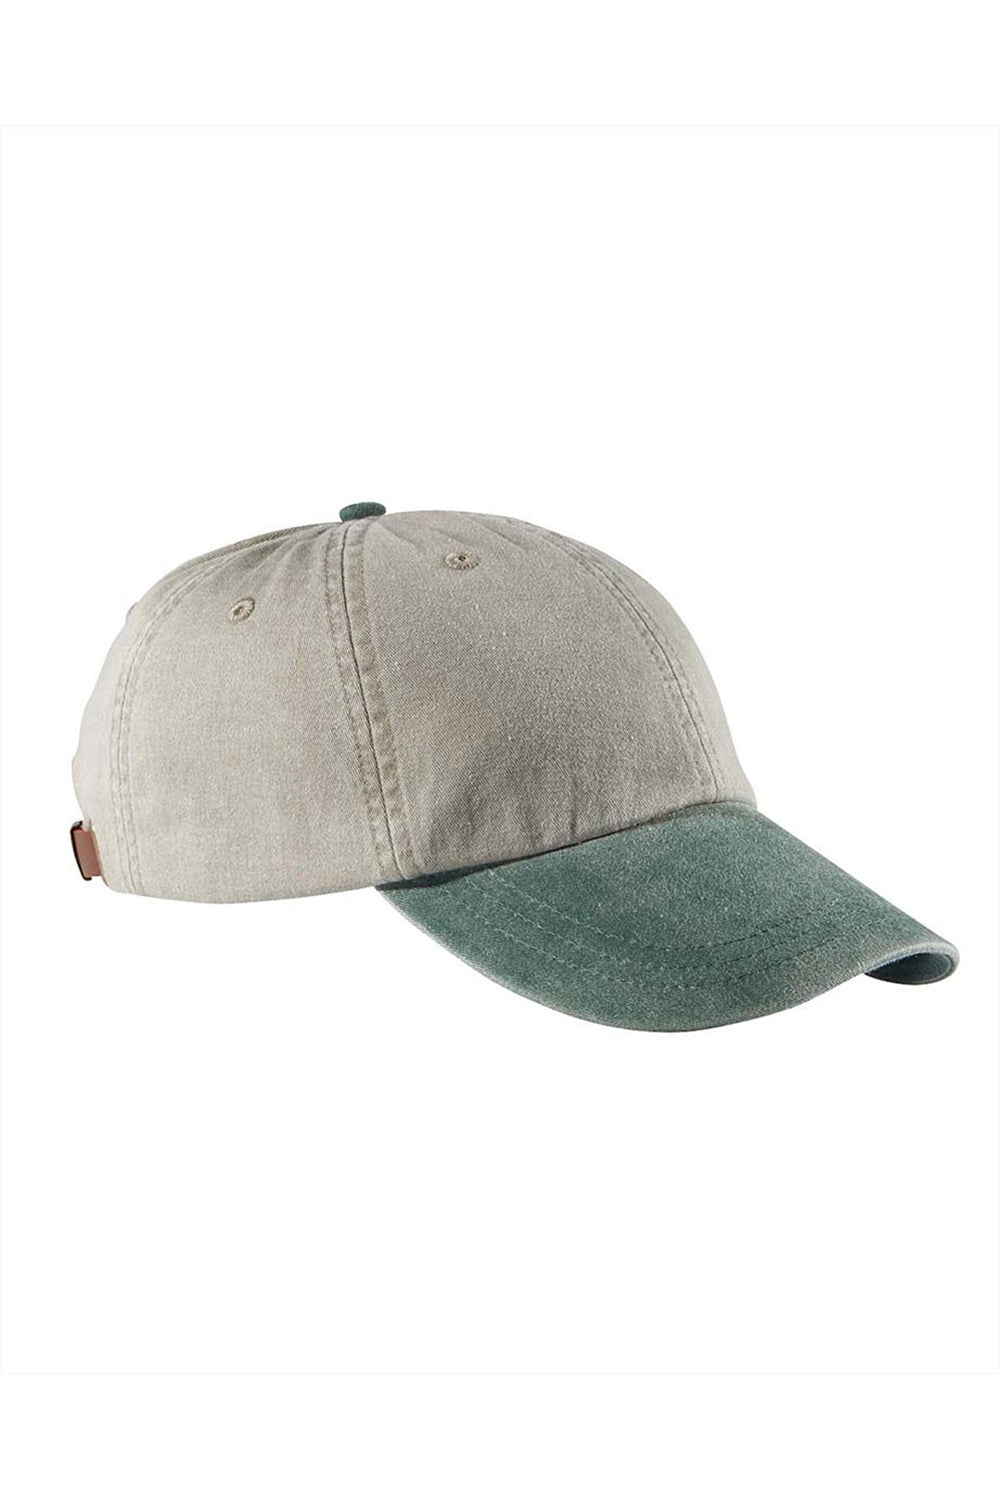 Adams AD969 Mens Adjustable Hat Stone/Forest Green Flat Front